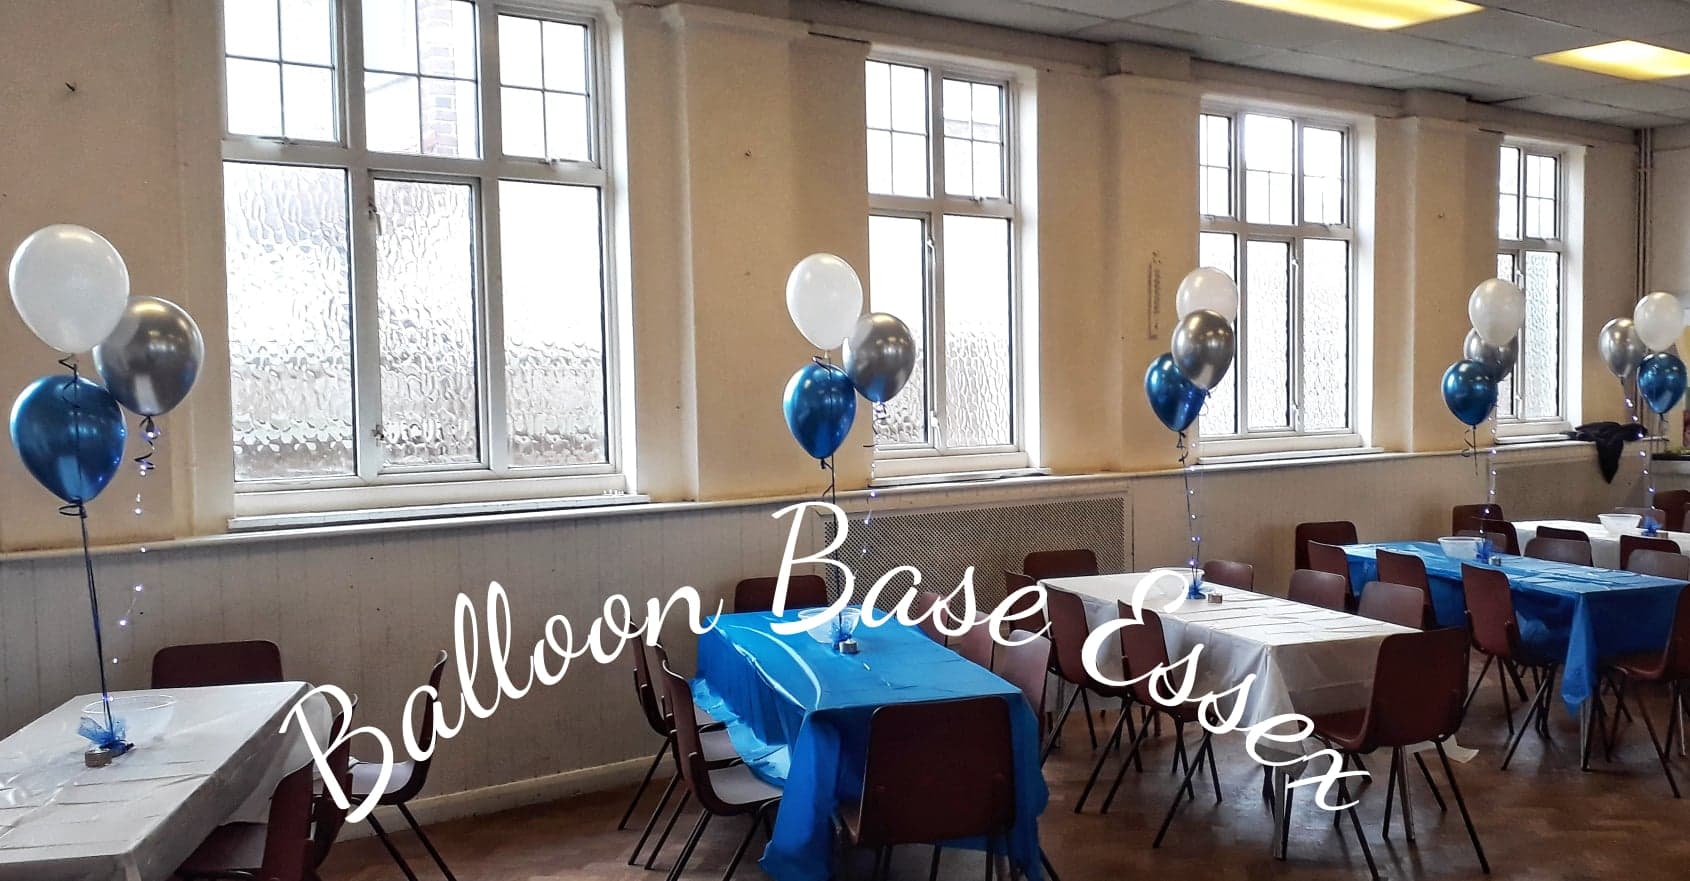 Blue, white and silver balloon bouquets